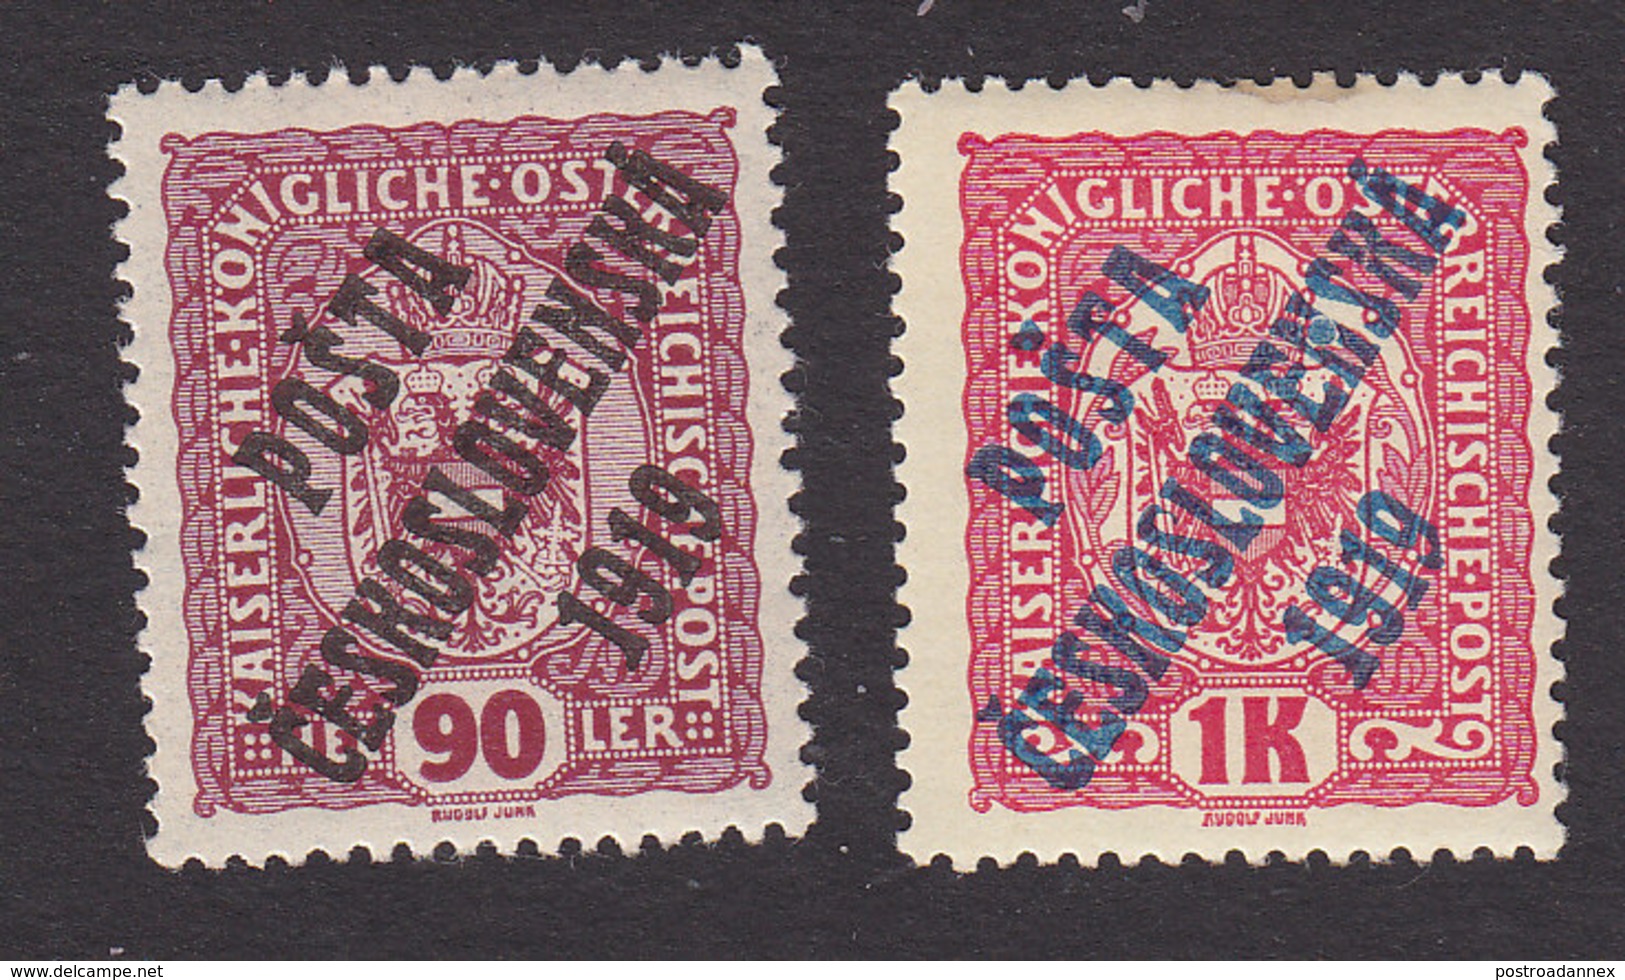 Czechoslovakia, Scott #B15-B16, Mint Hinged, Austrian Stamps Overprinted, Issued 1919 - Unused Stamps